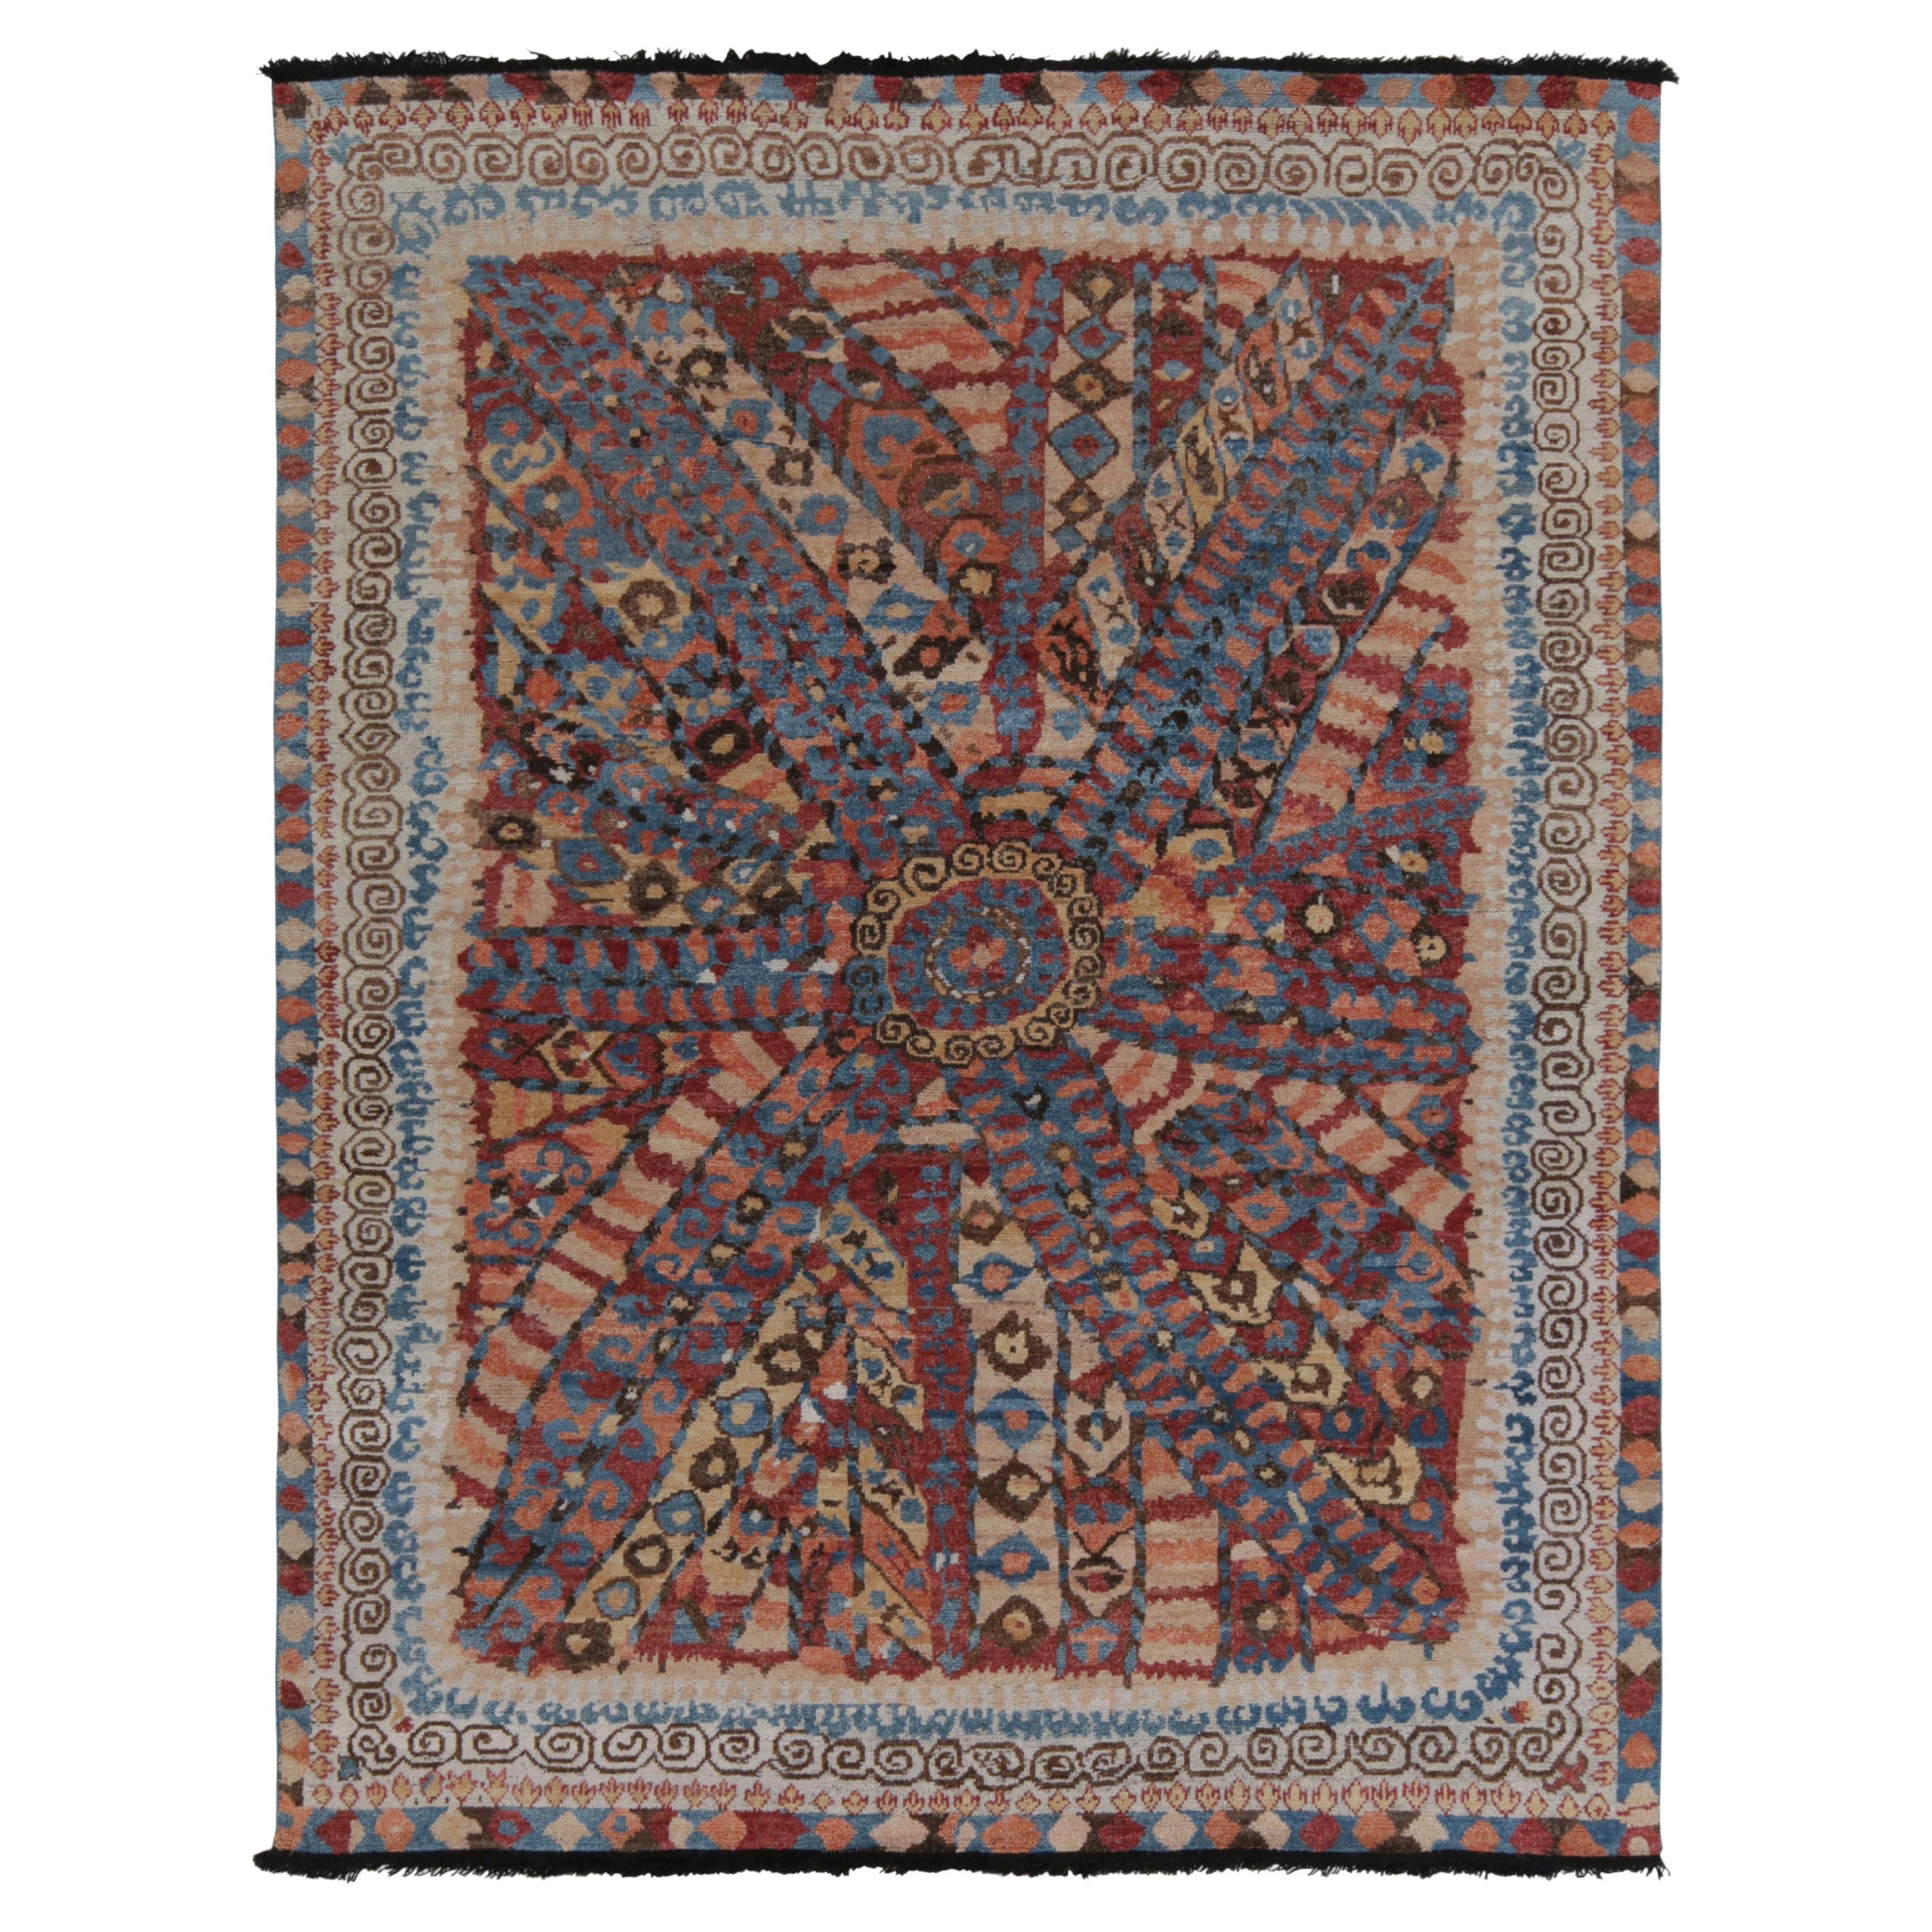 Rug & Kilim’s Tribal Style Rug in Red, Blue and Beige-Brown Geometric Pattern For Sale